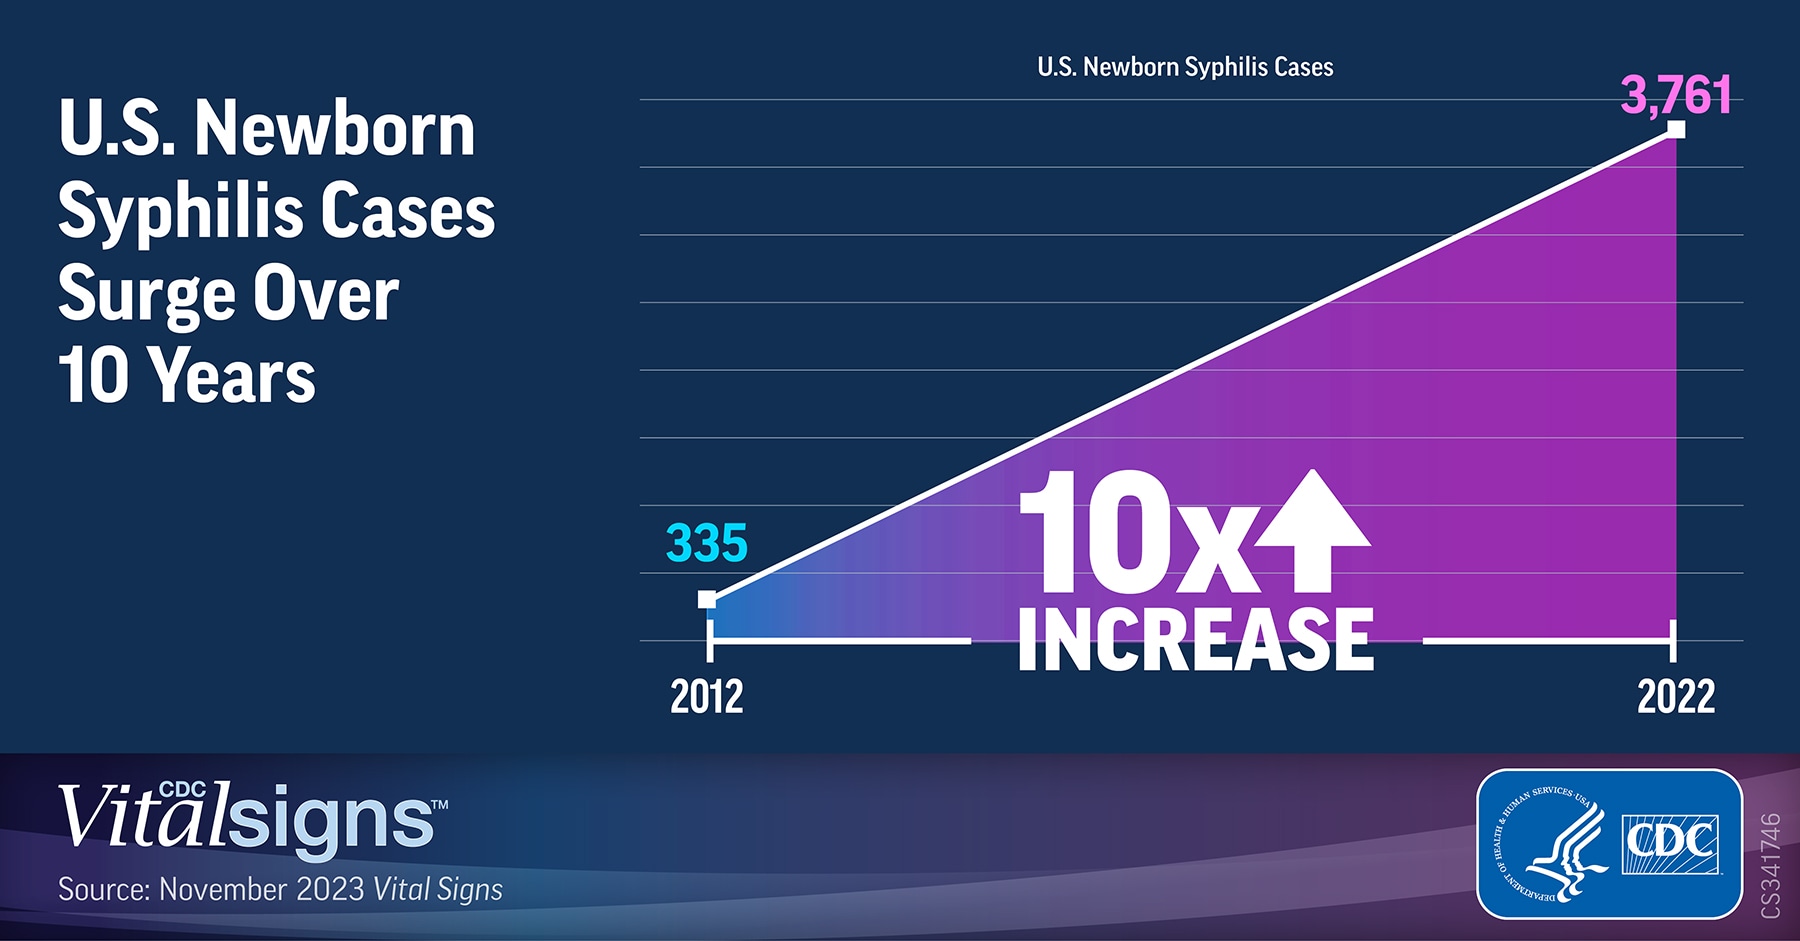 Chart shows figures shaded to represent a 10-times increase in U.S. newborn syphilis cases over 10 years.